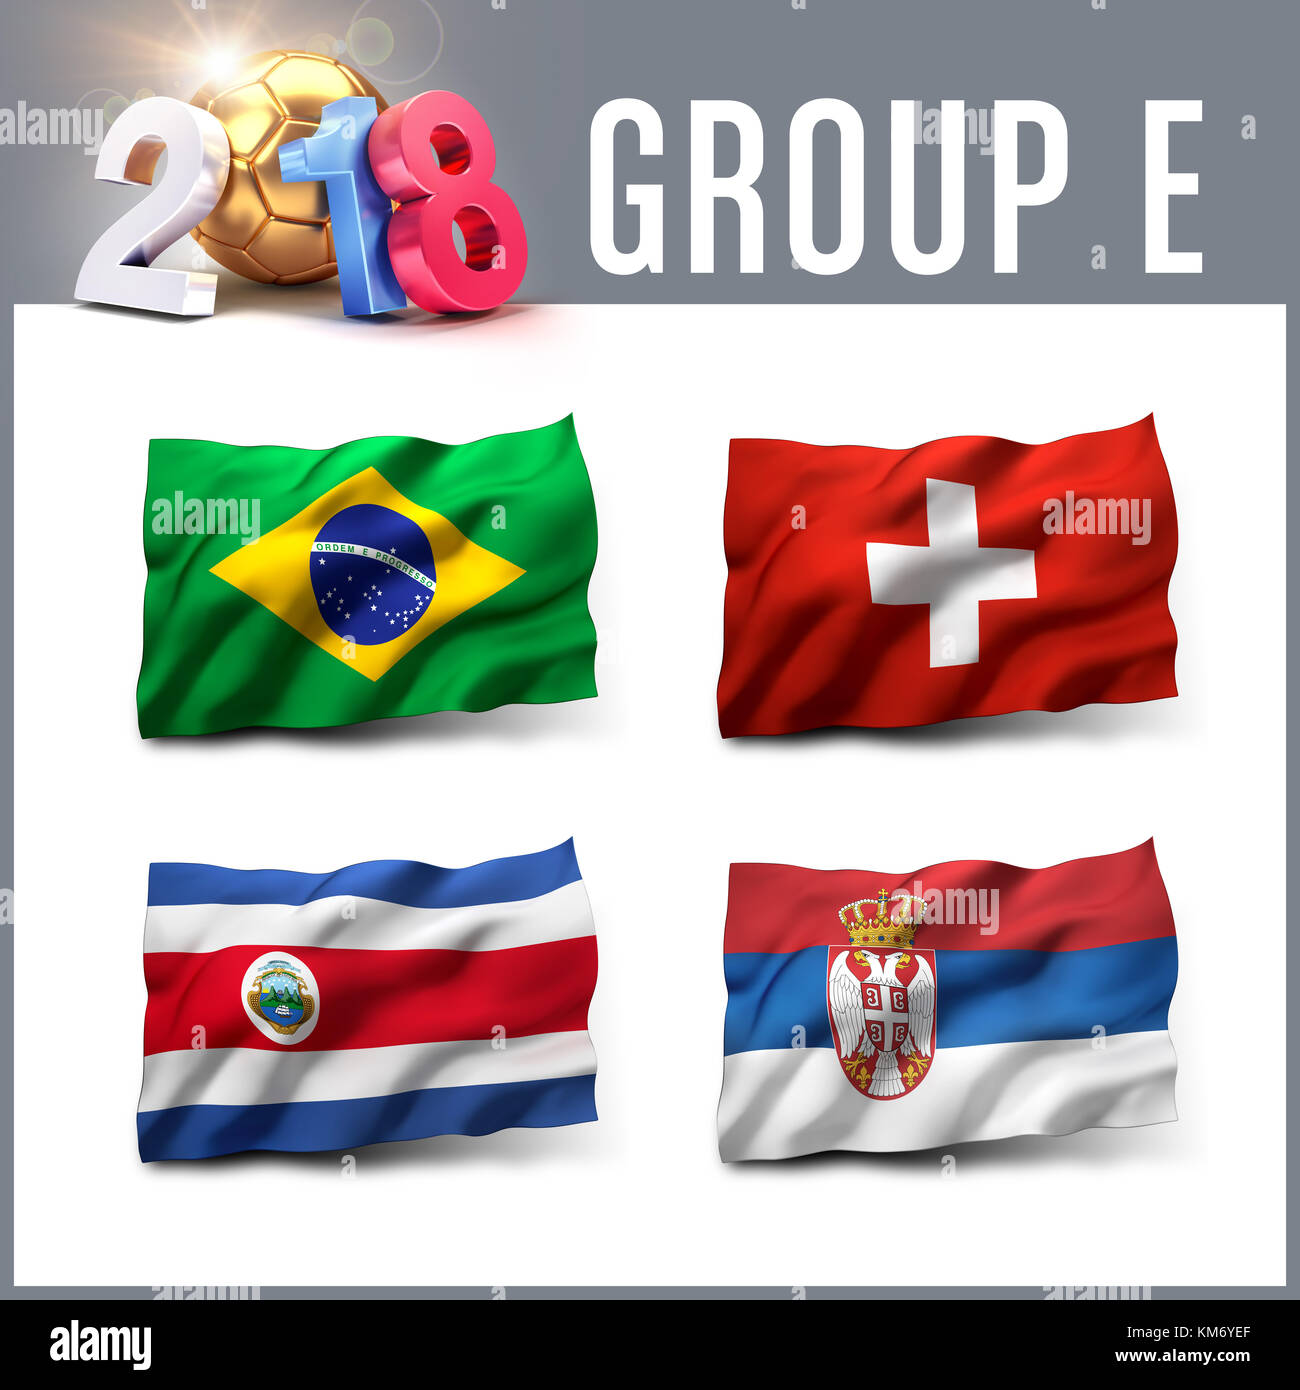 Russia 2018 qualifying group E with team flags. International soccer competition. 3D illustration. Stock Photo